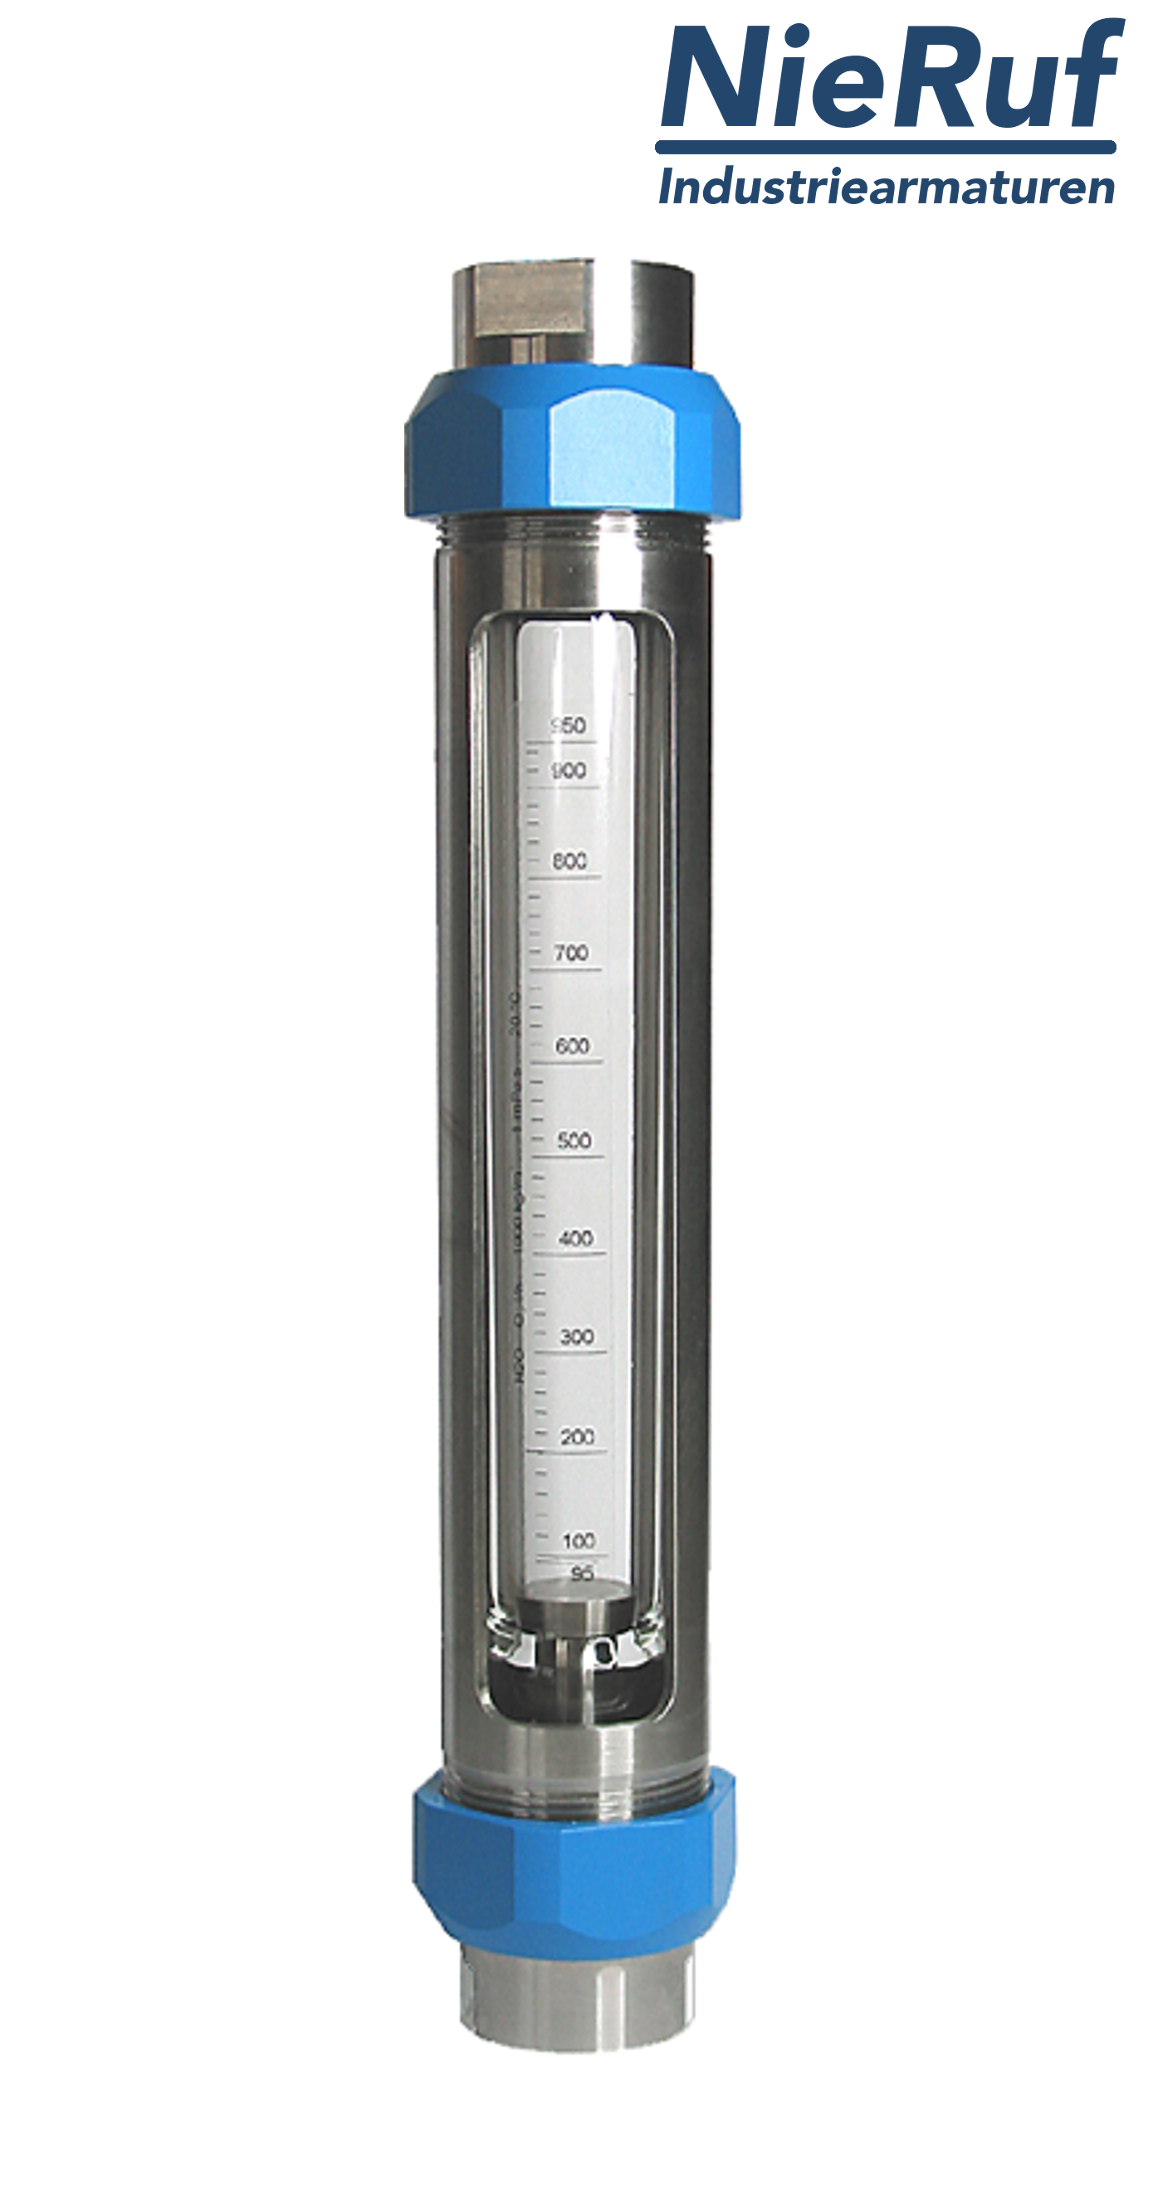 Variable area flowmeter stainless steel + borosilicate 1 1/4" inch 500.0 - 5000 l/h water EPDM